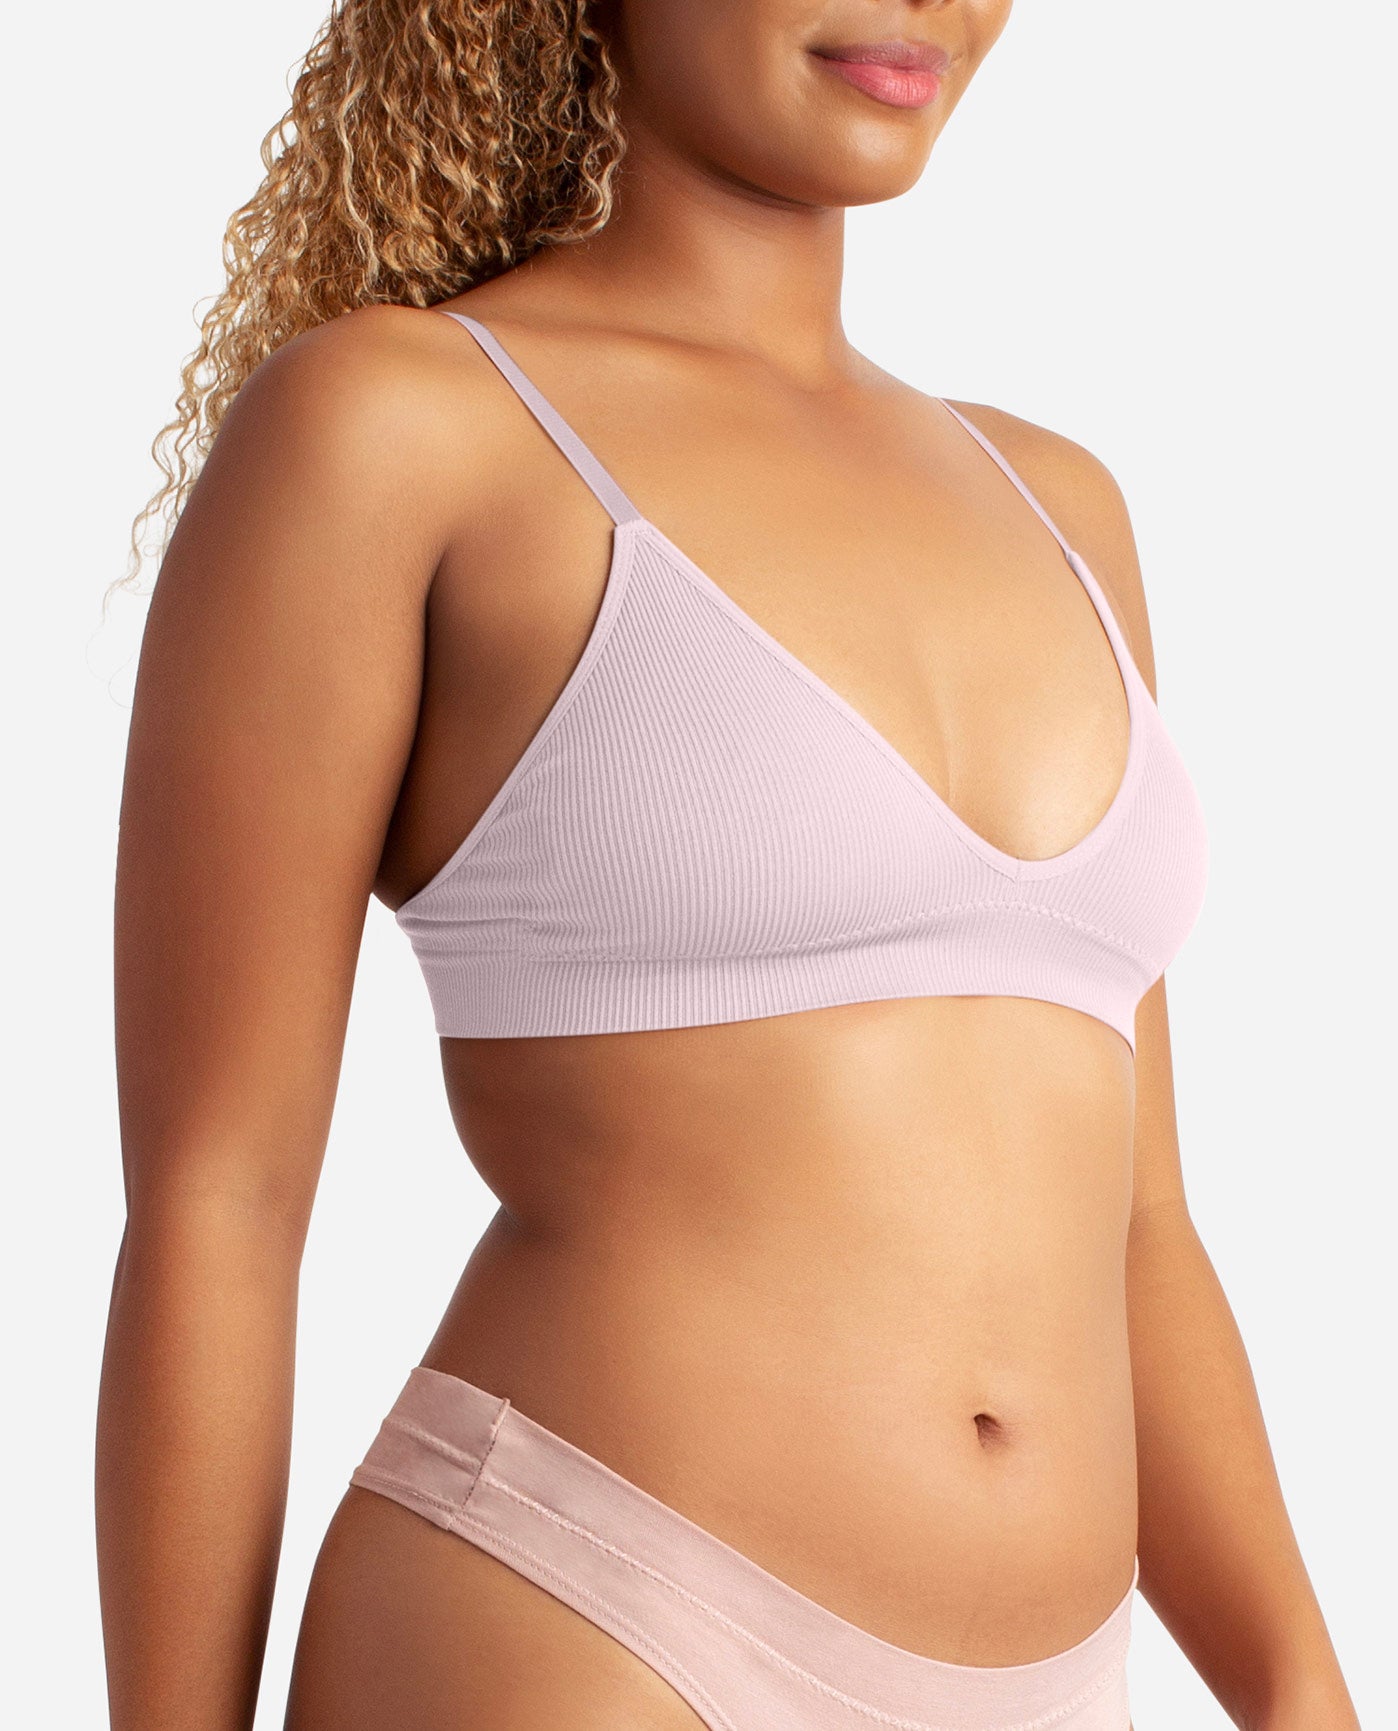 Danskin Gray Double Strap Ribbed Bralette Size Small - $7 - From